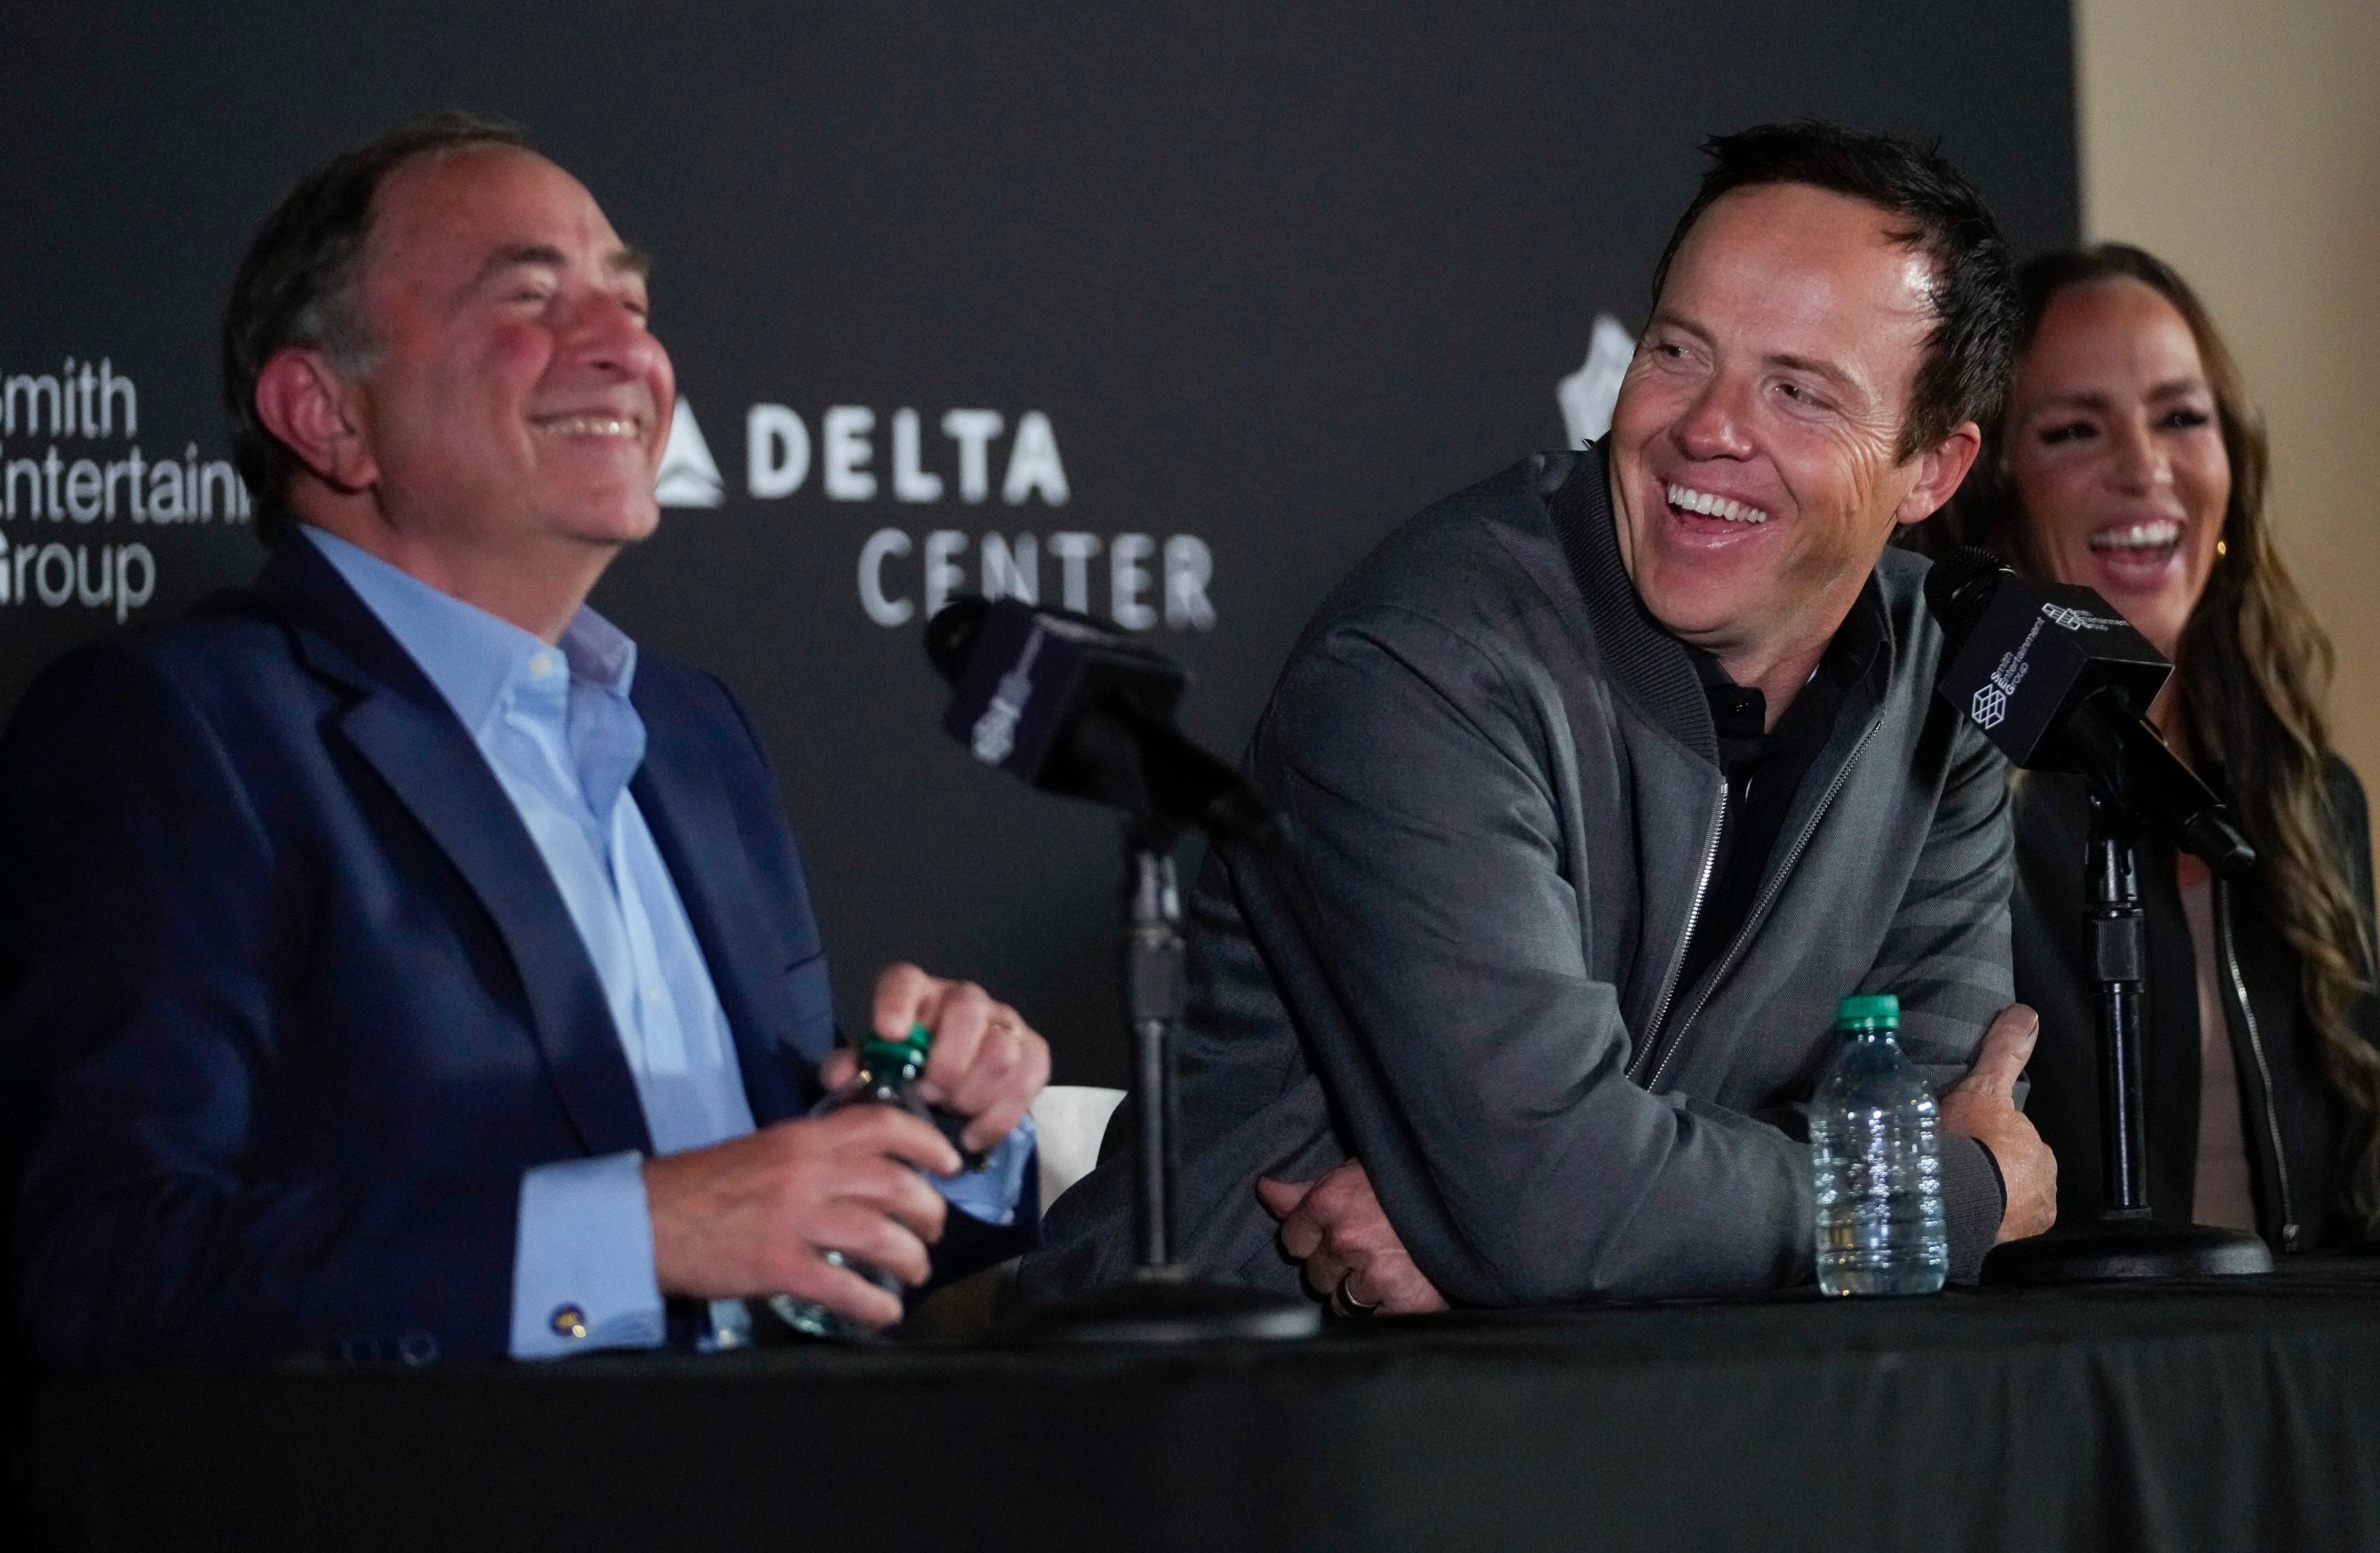 (Bethany Baker  |  The Salt Lake Tribune) SEG owner Ryan Smith, center, laughs as he looks at NHL Commissioner Gary Bettman during a press conference announcing a new National Hockey League team owned by Smith Entertainment Group at the Delta Center in Salt Lake City on Friday, April 19, 2024.